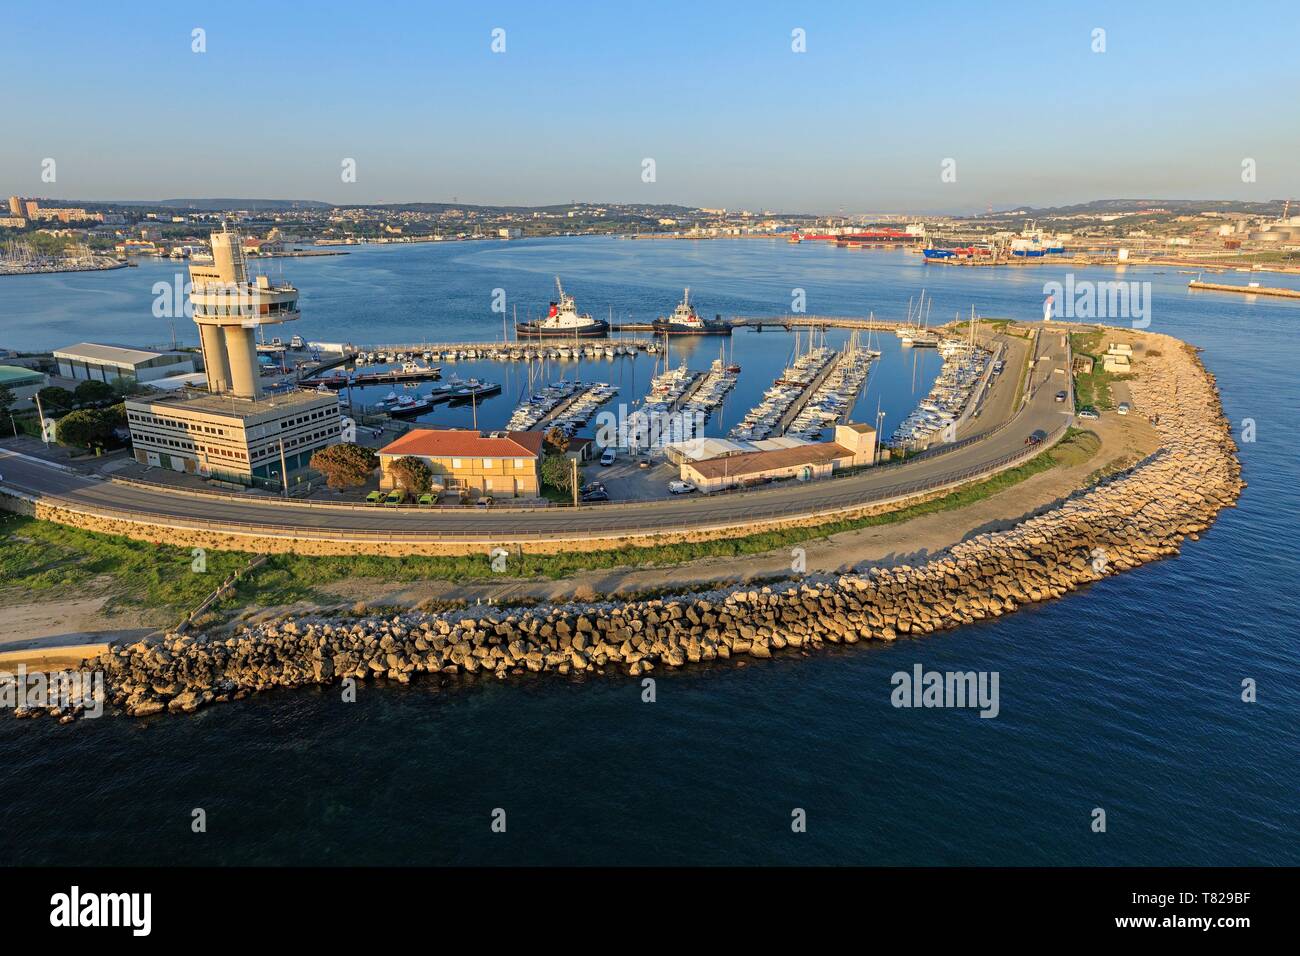 France, Bouches du Rhone, Gulf of Fos sur Mer, Port de Bouc, Harbor of the western basins of the Grand Port Maritime of Marseille (aerial view) Stock Photo